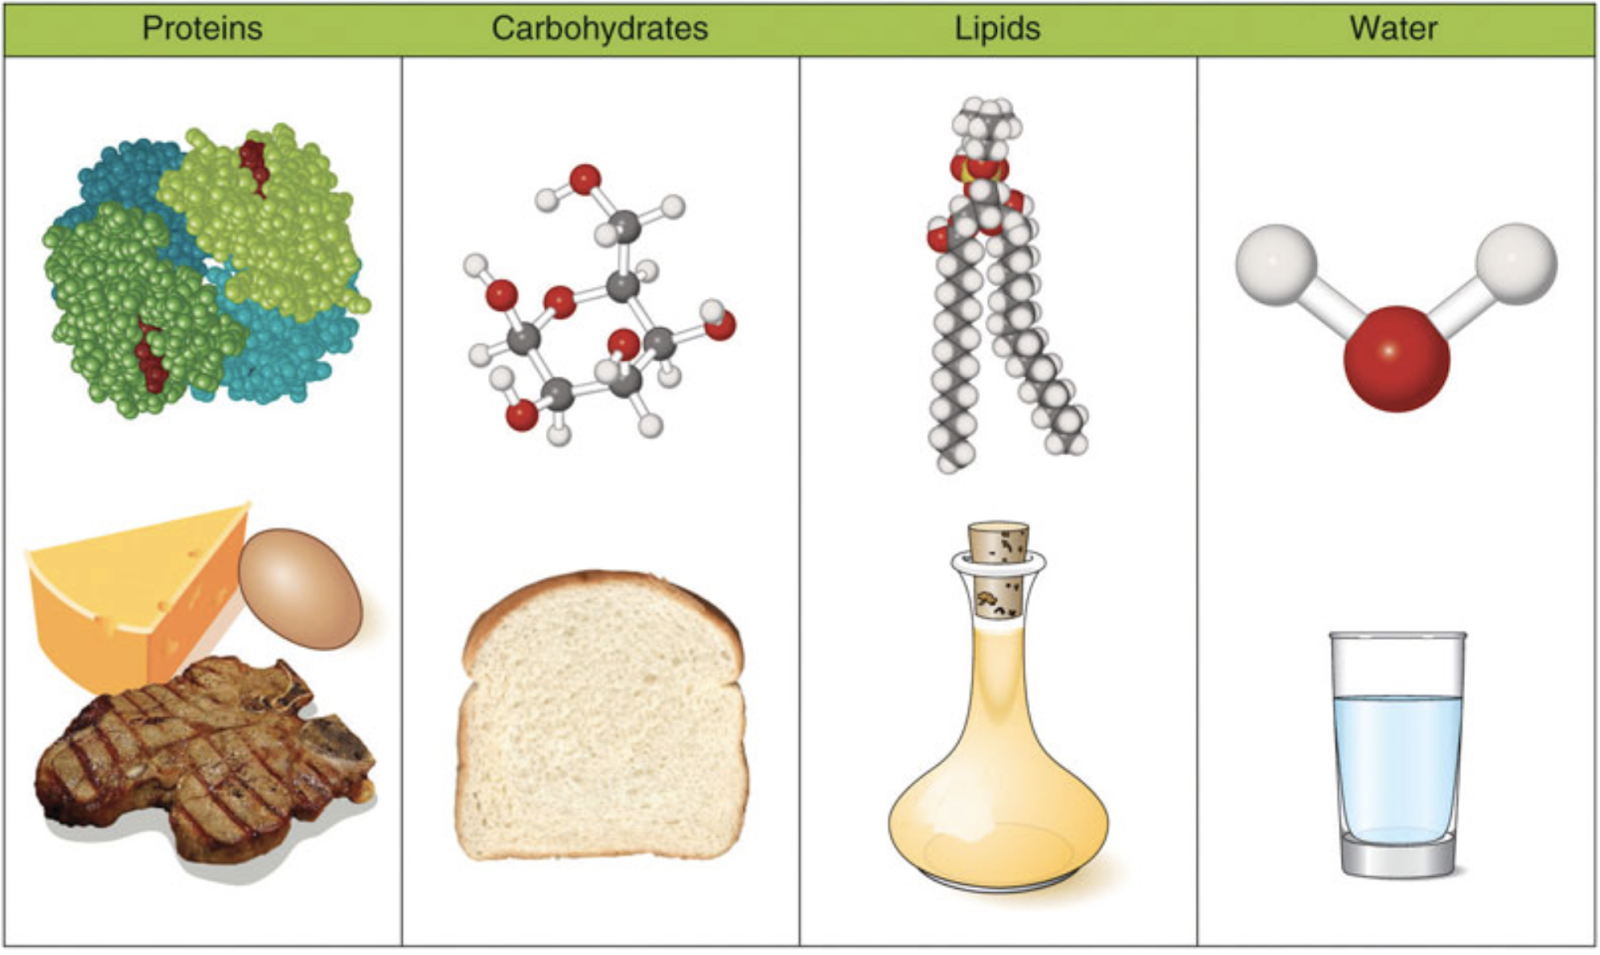 This image shows the chemical structure of each macronutrient along with typical food sources. Cheese, eggs and meat are shown for protein, bread for carbohydrates, oil for lipids and a glass of water for water.